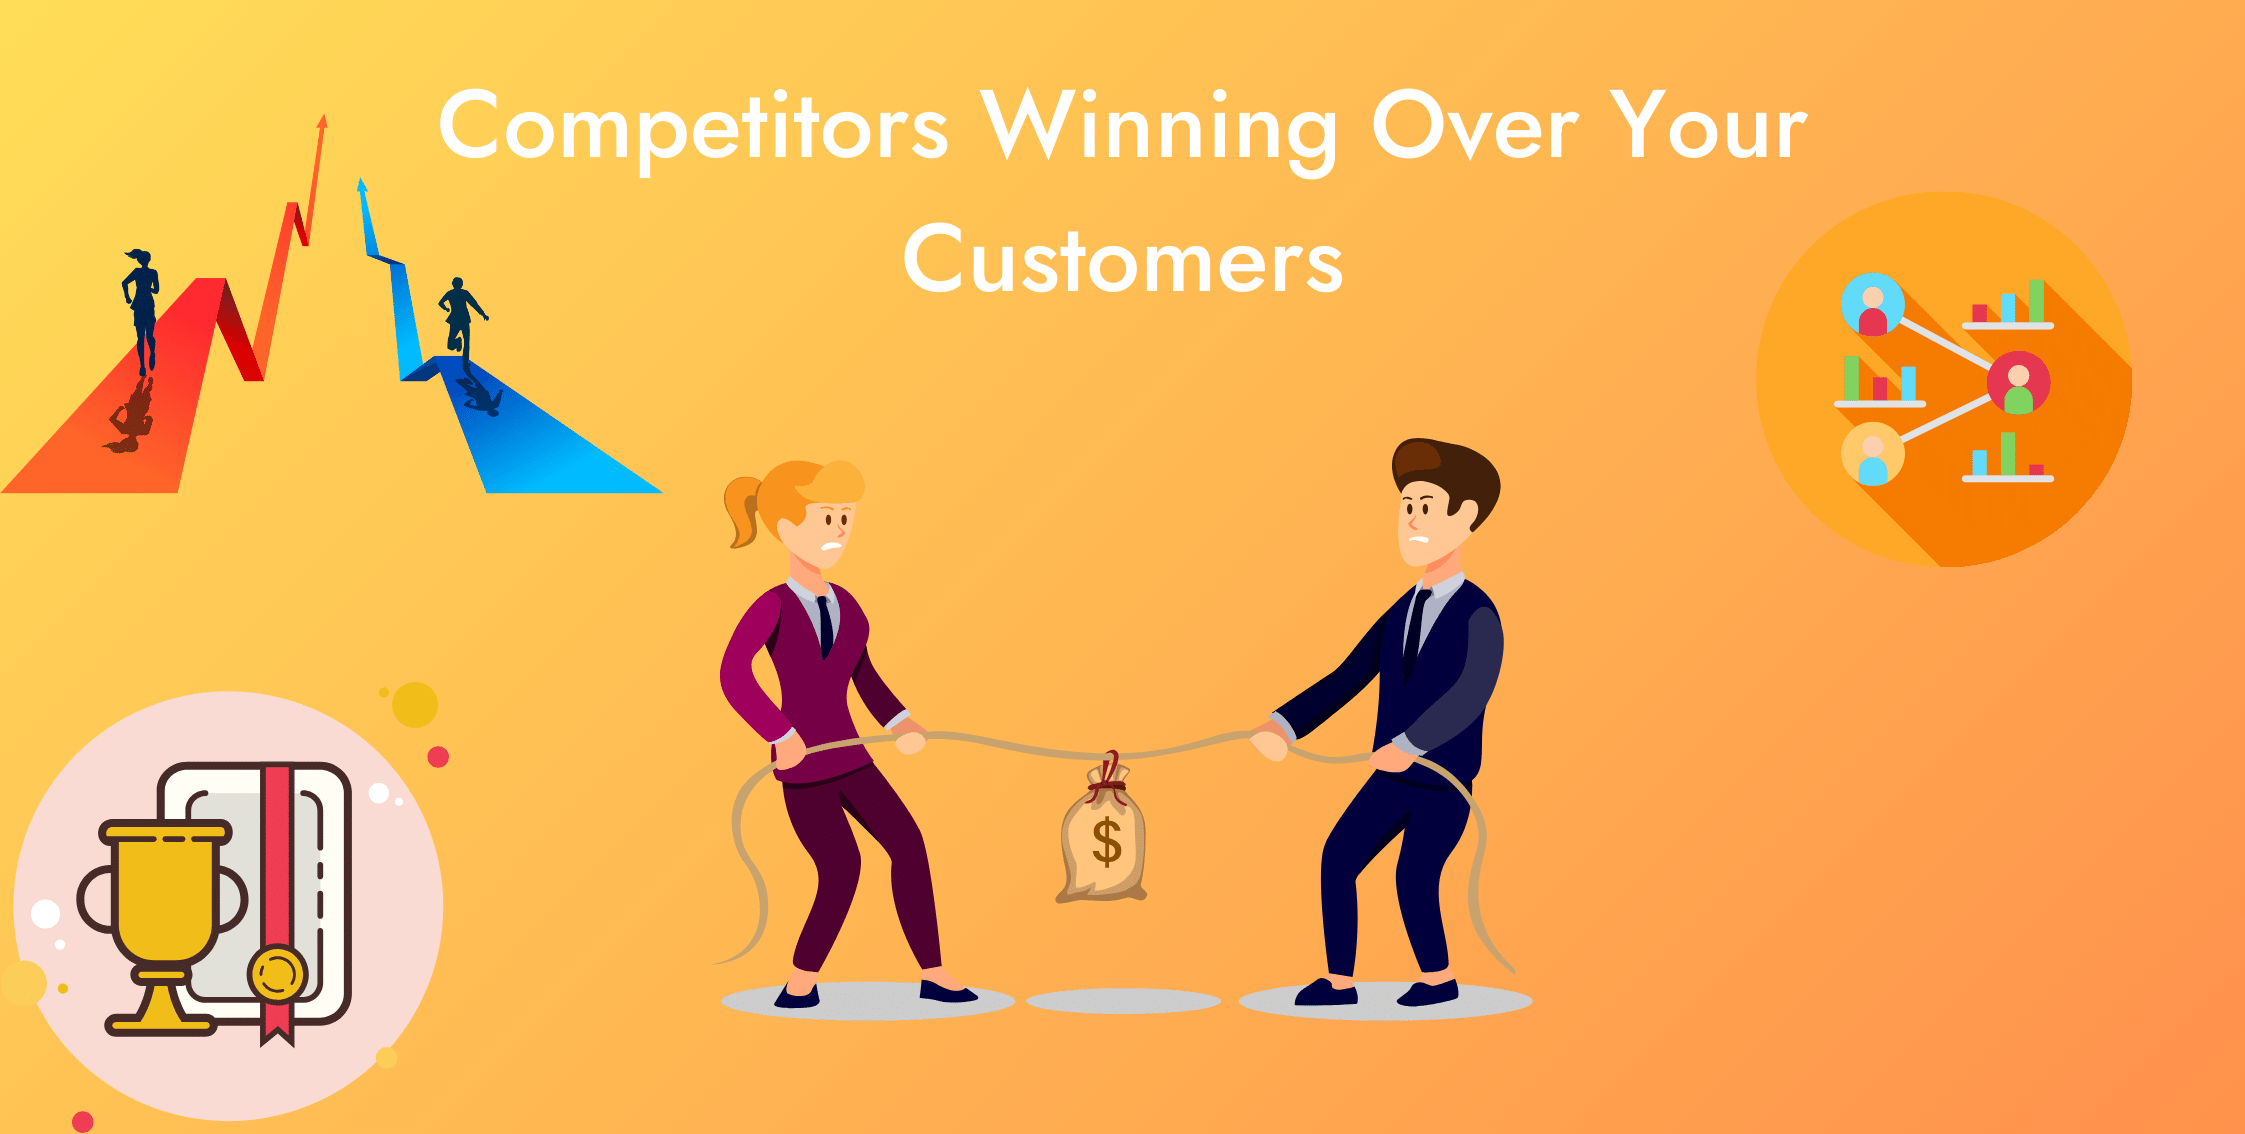 Here’s How Your Competitors Are Winning Over Your Customers.